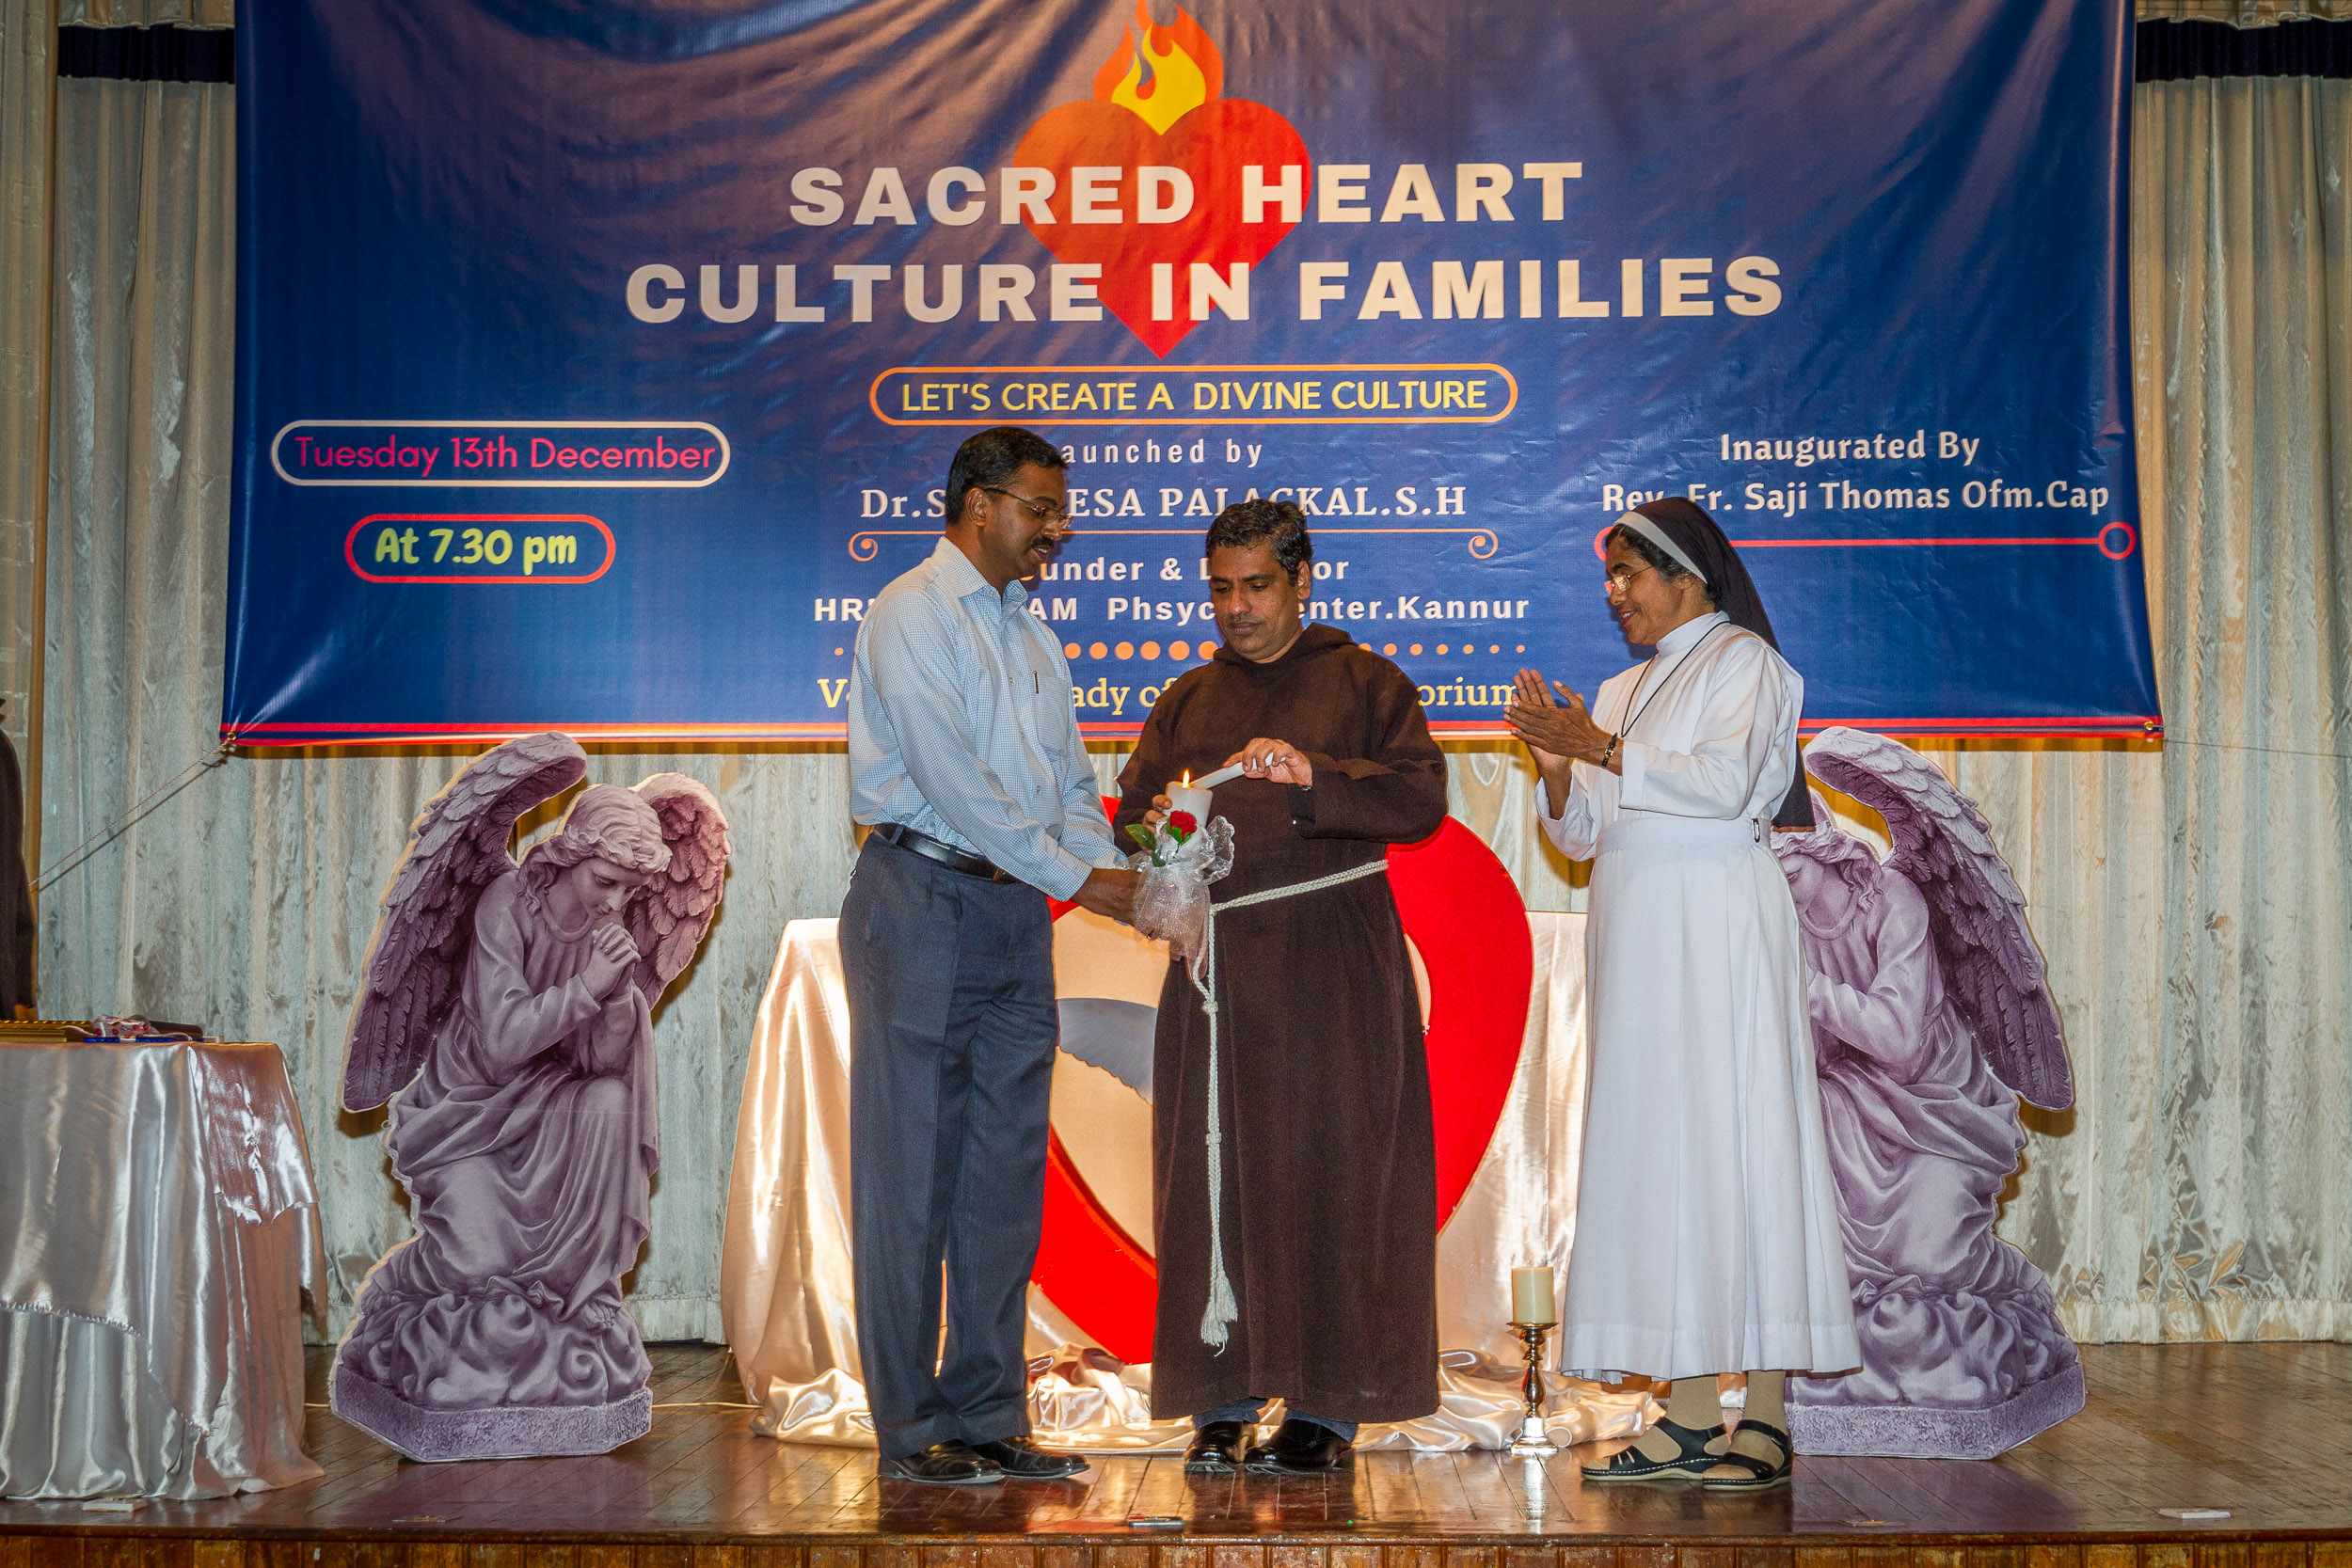 SACRED HEART CULTURE FOR FAMILIES